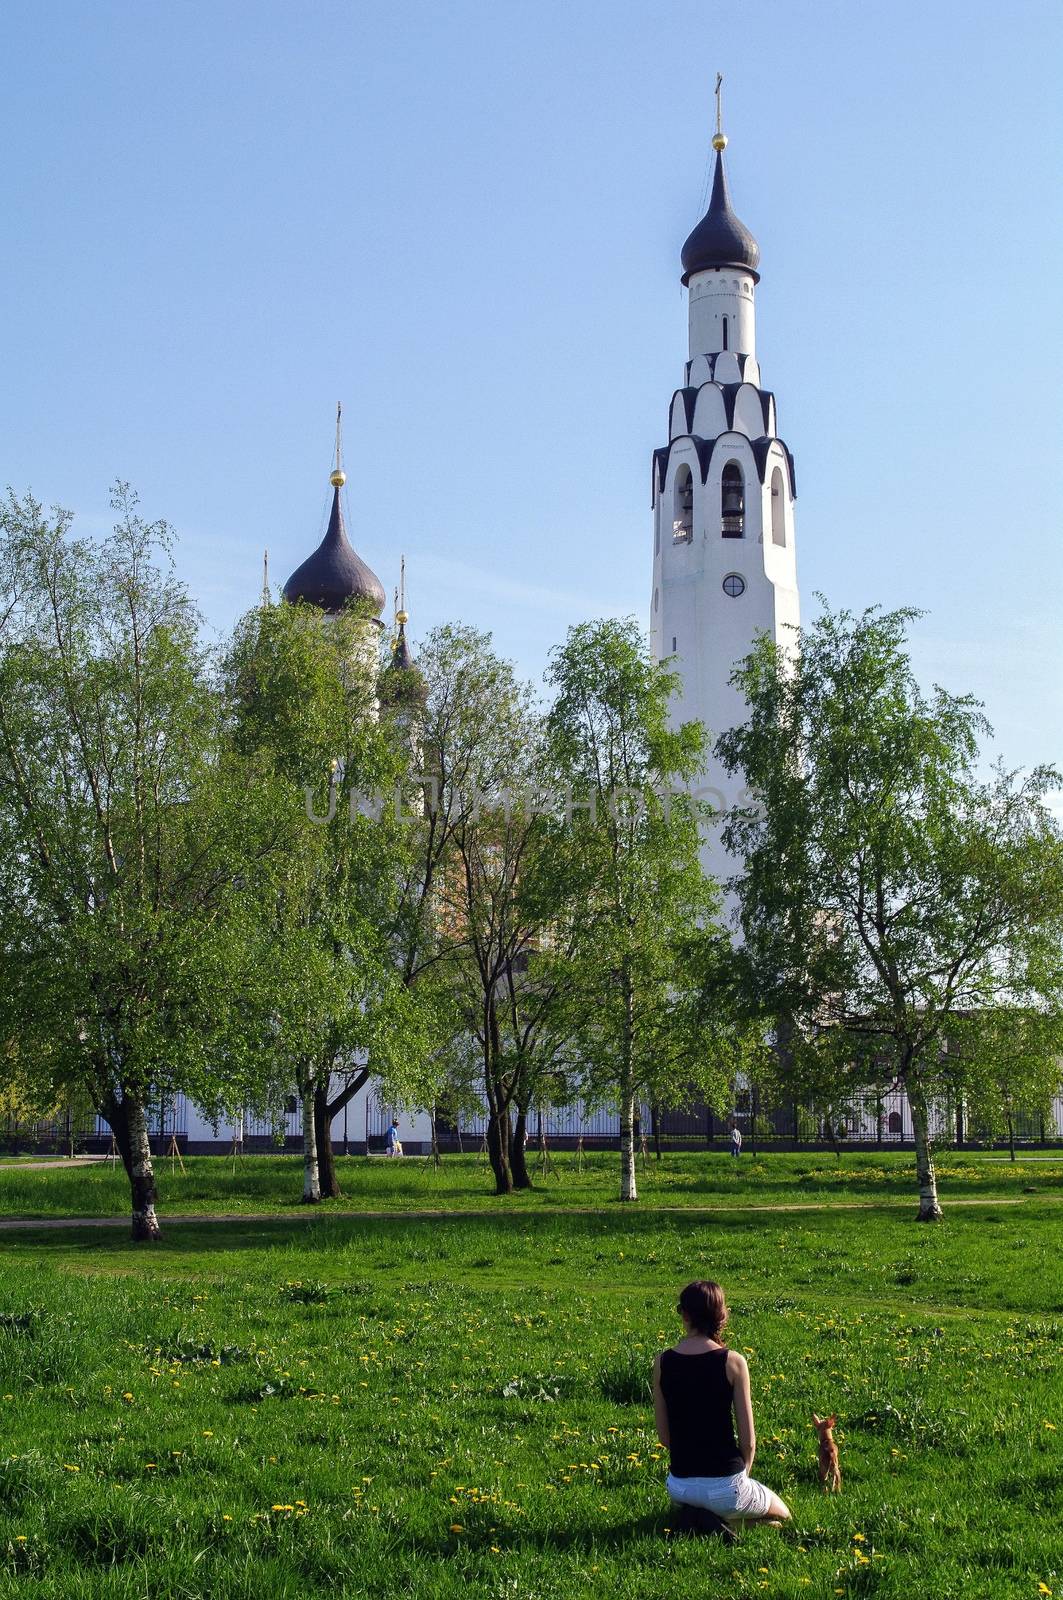 a young woman with a small dog sitting on grass in the park with a church in the background